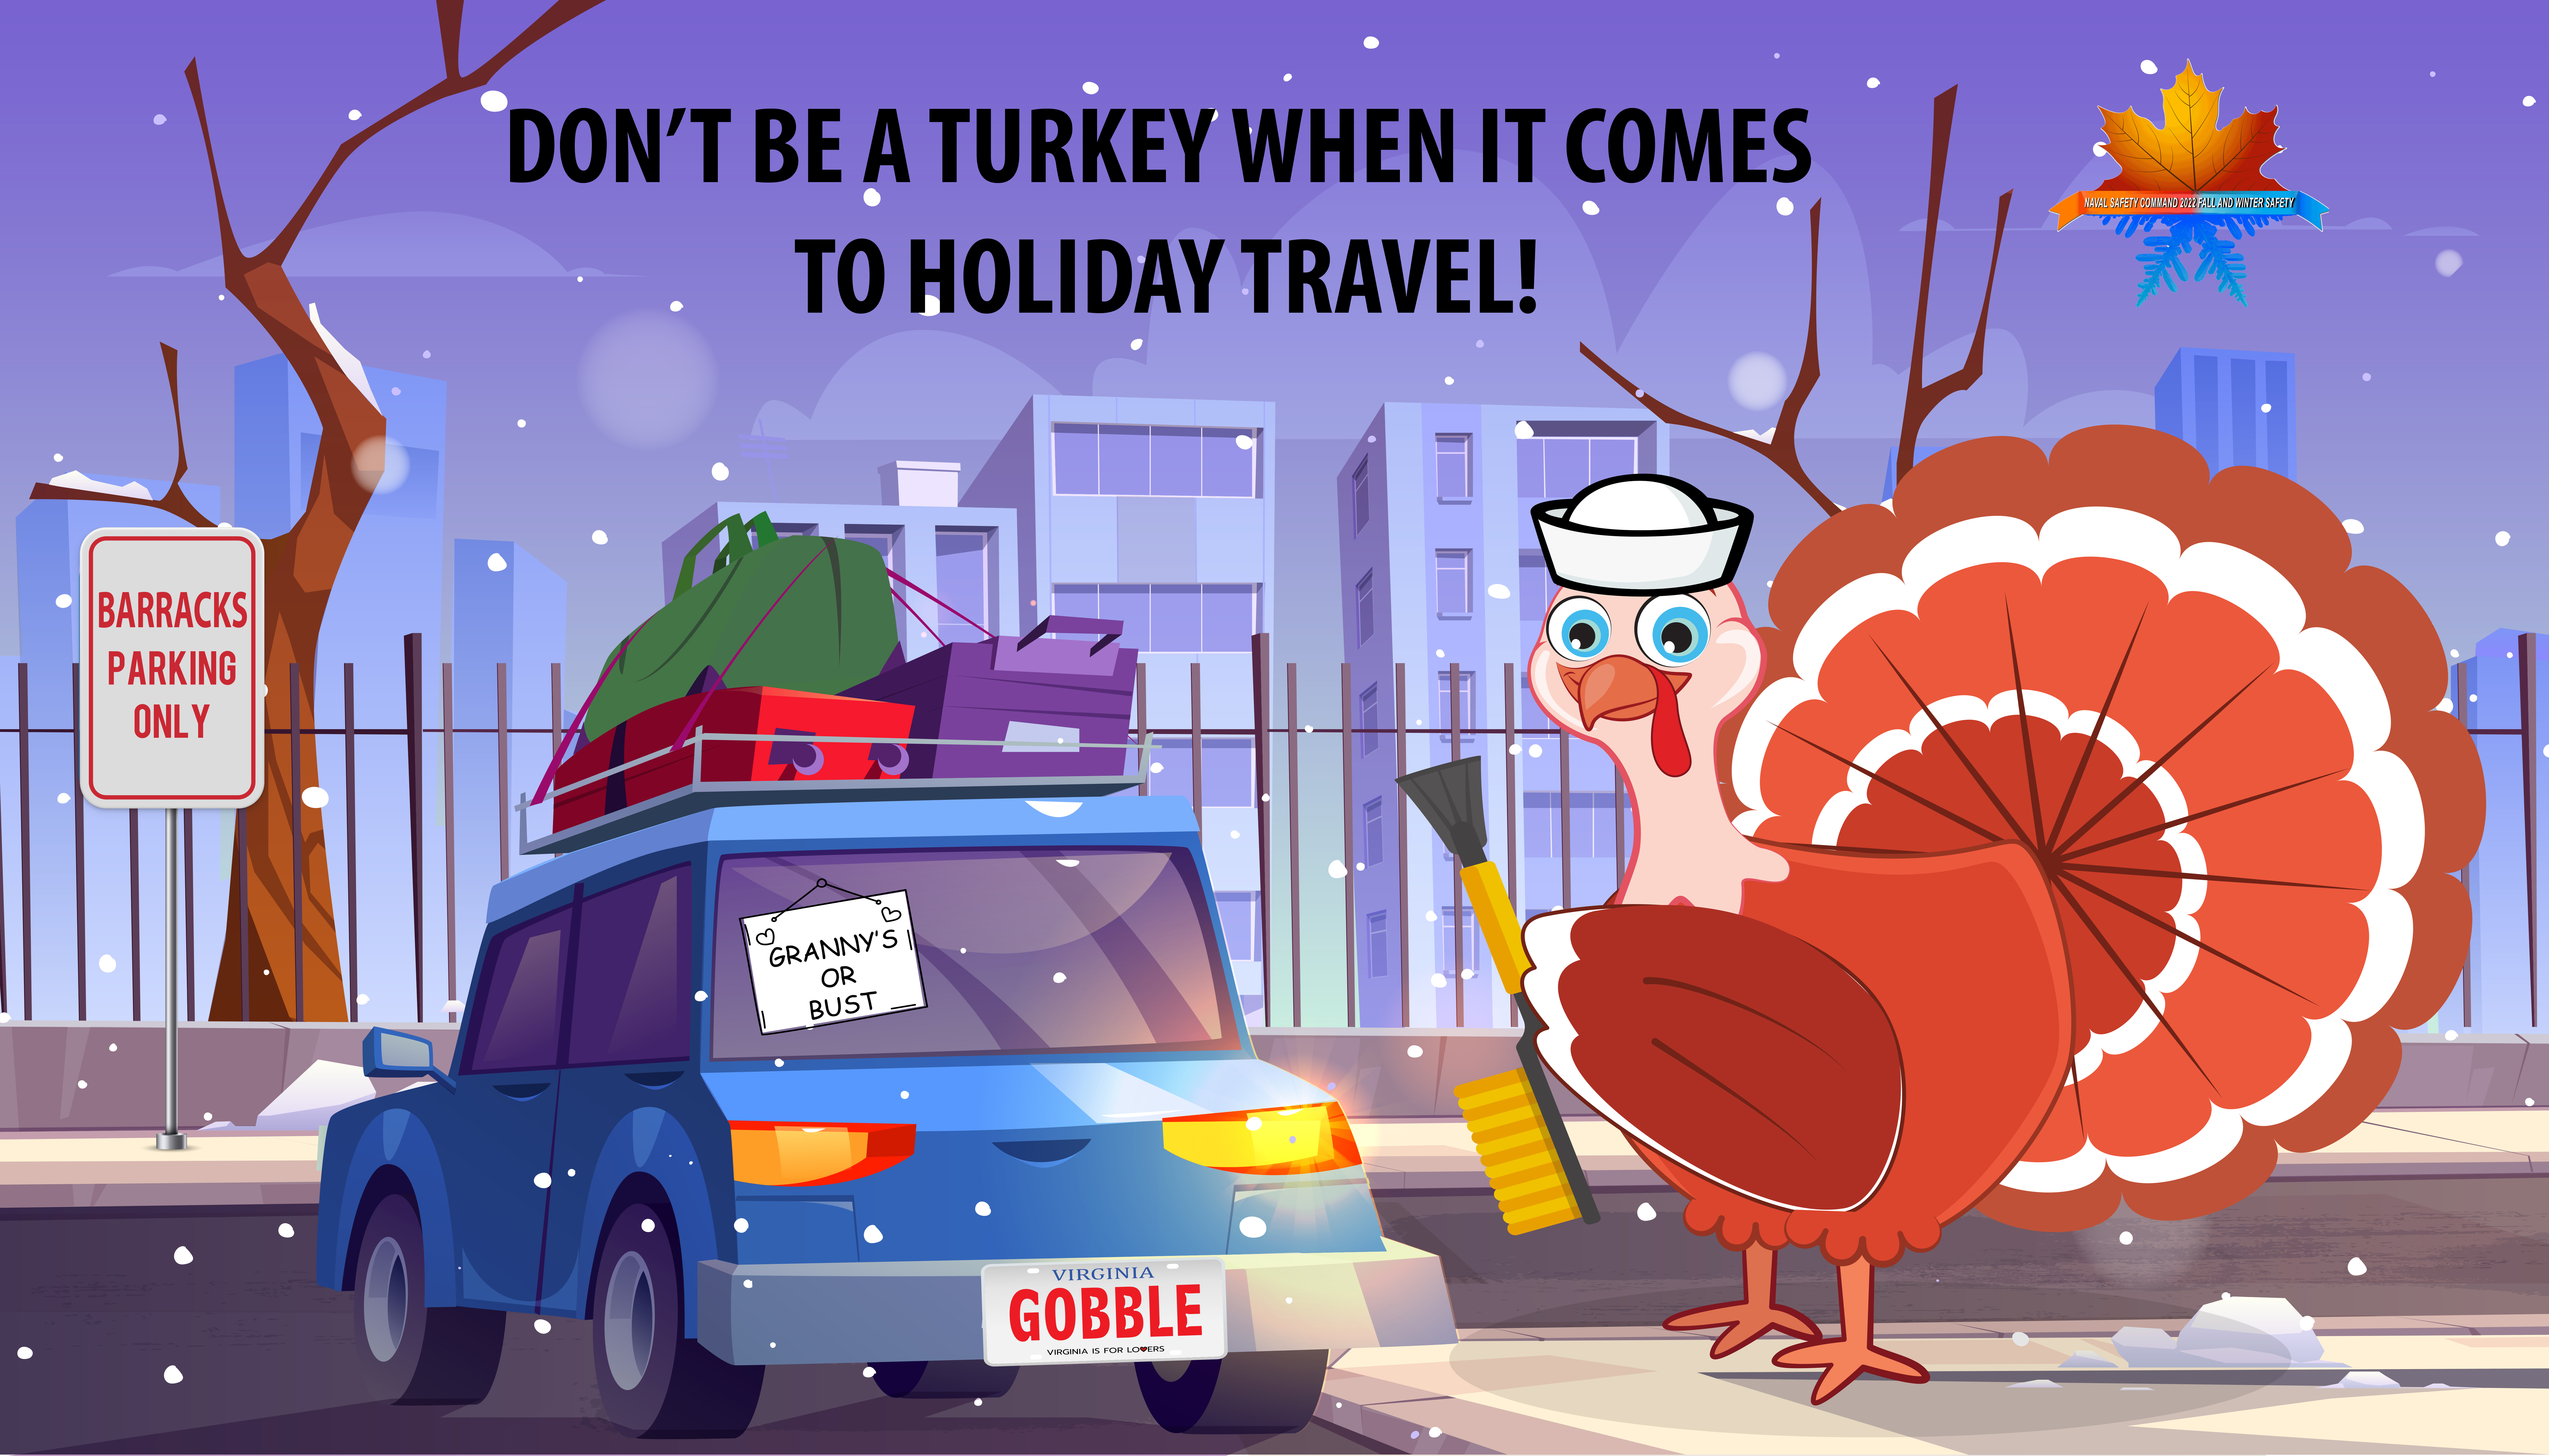 Don't Be a Turkey When Hitting the Roads